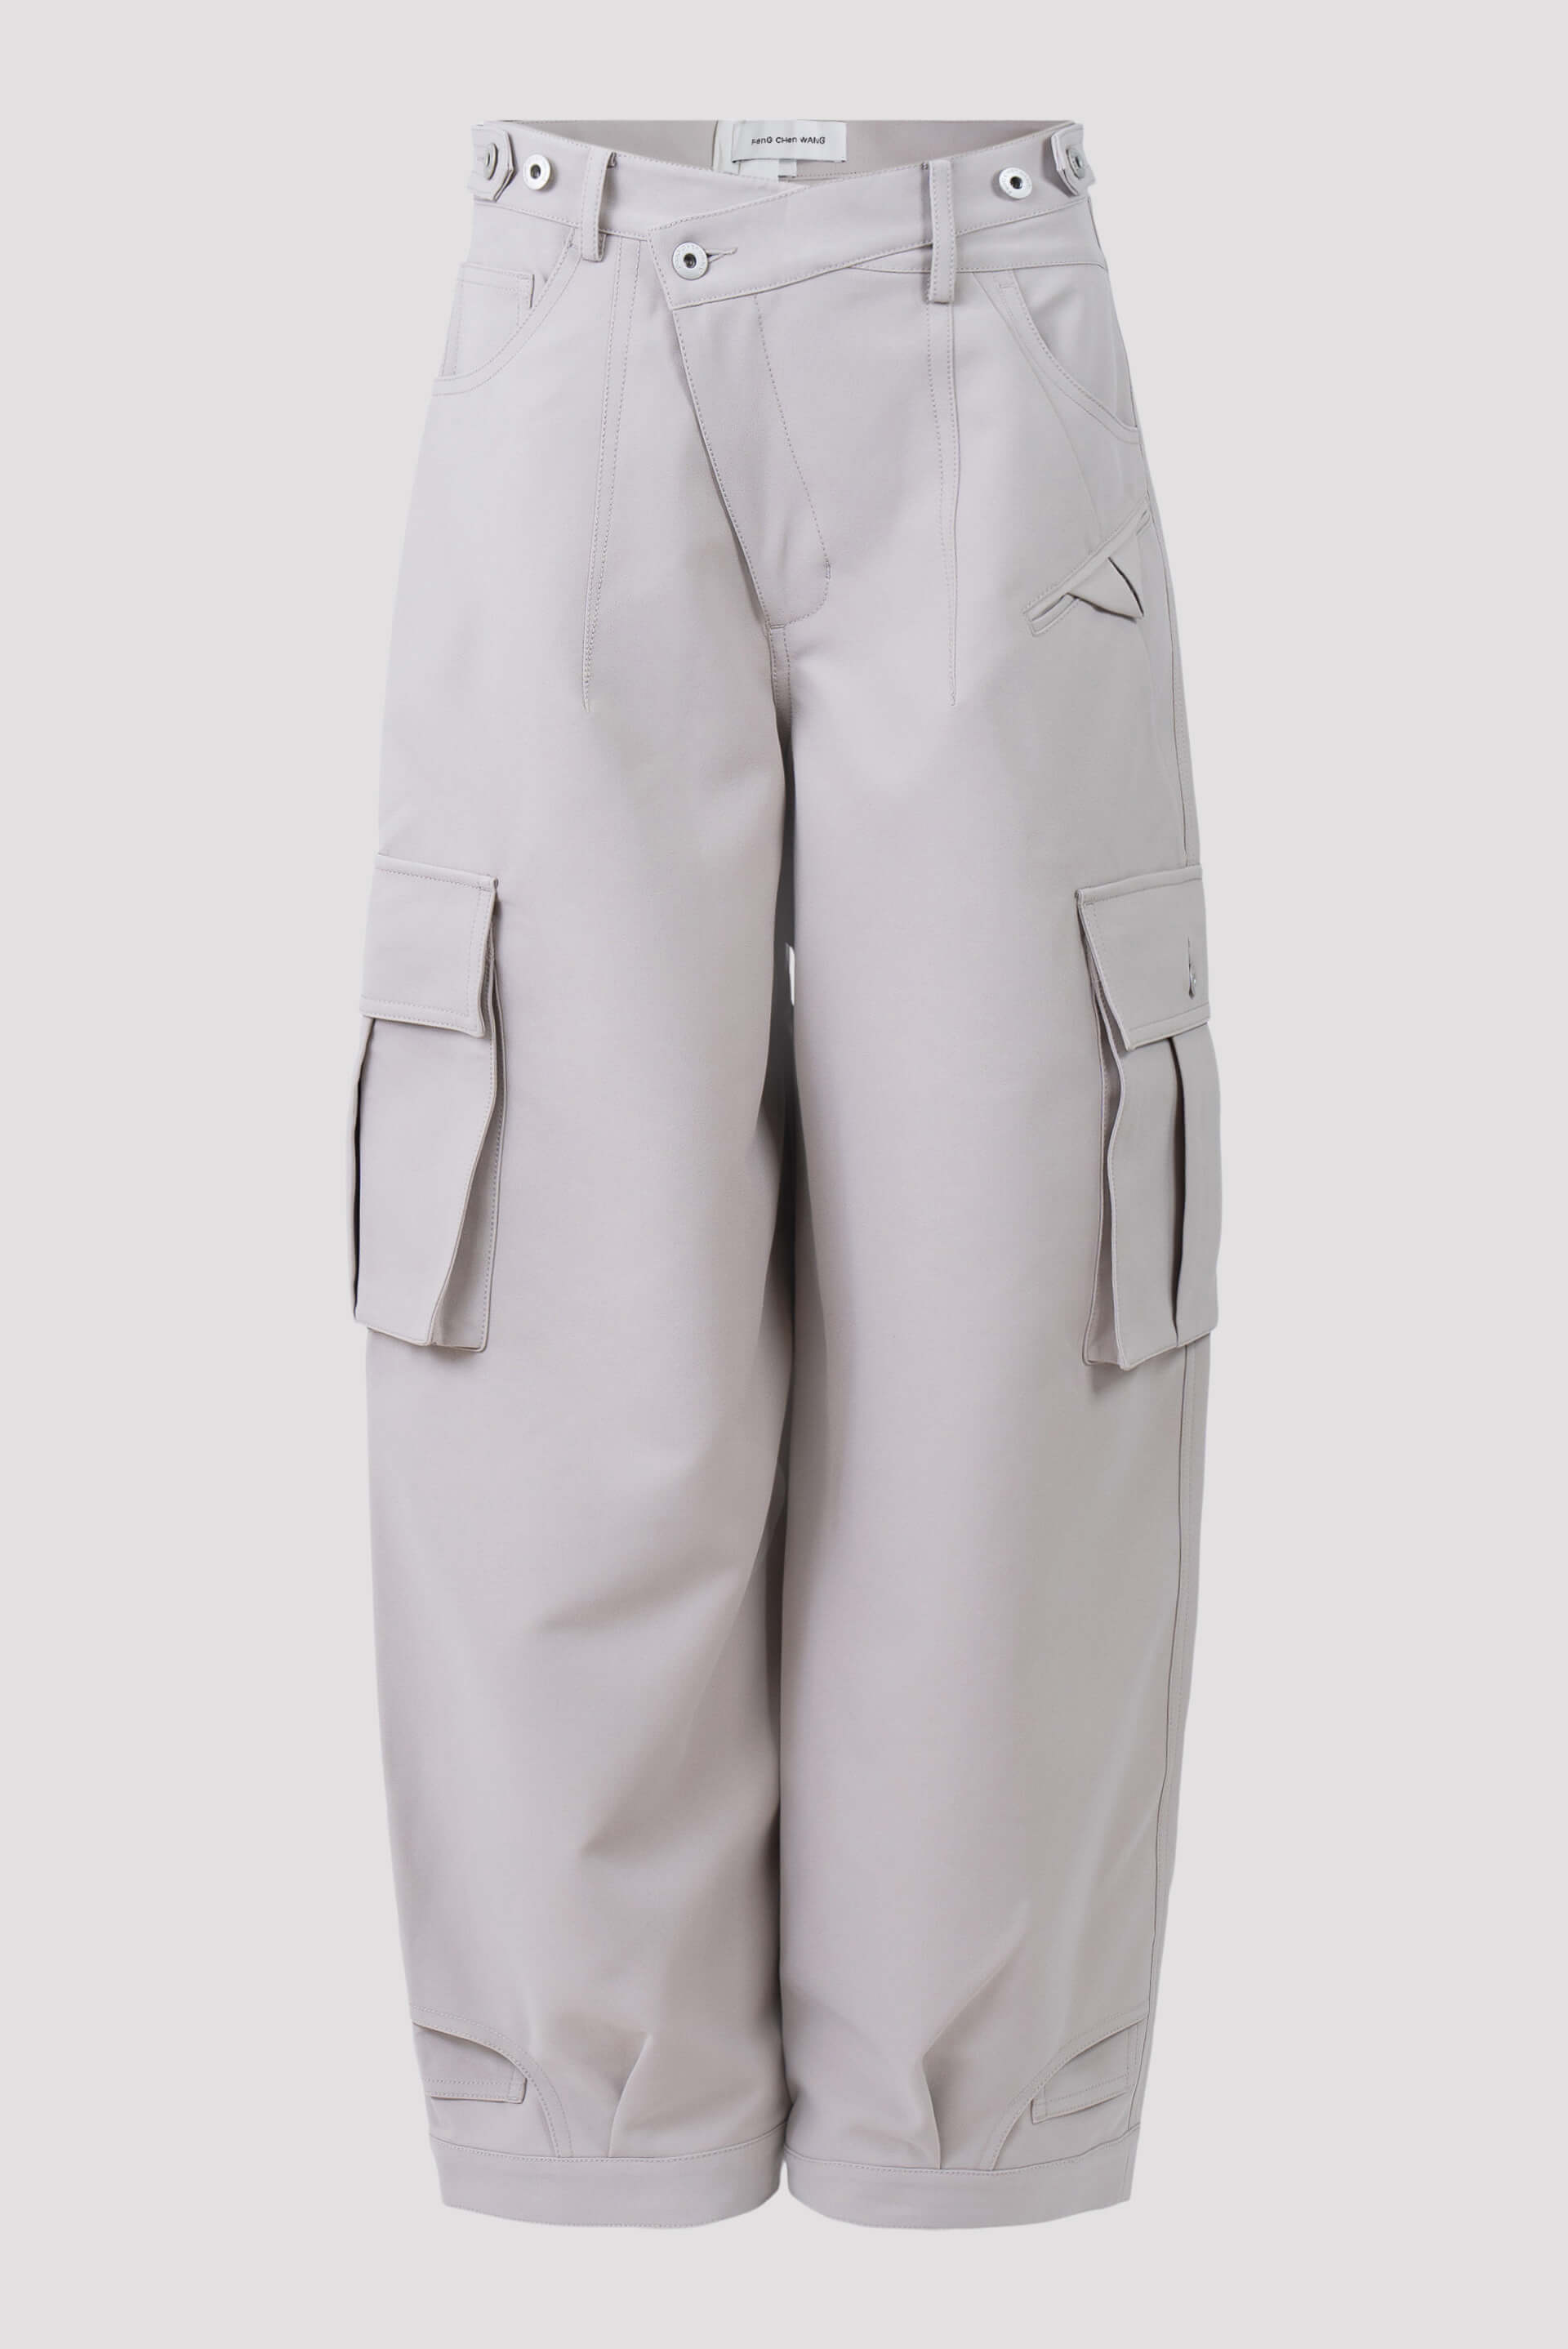 Feng Chen Wang Tilted Waistband Cargo Pants - Fabric of Society